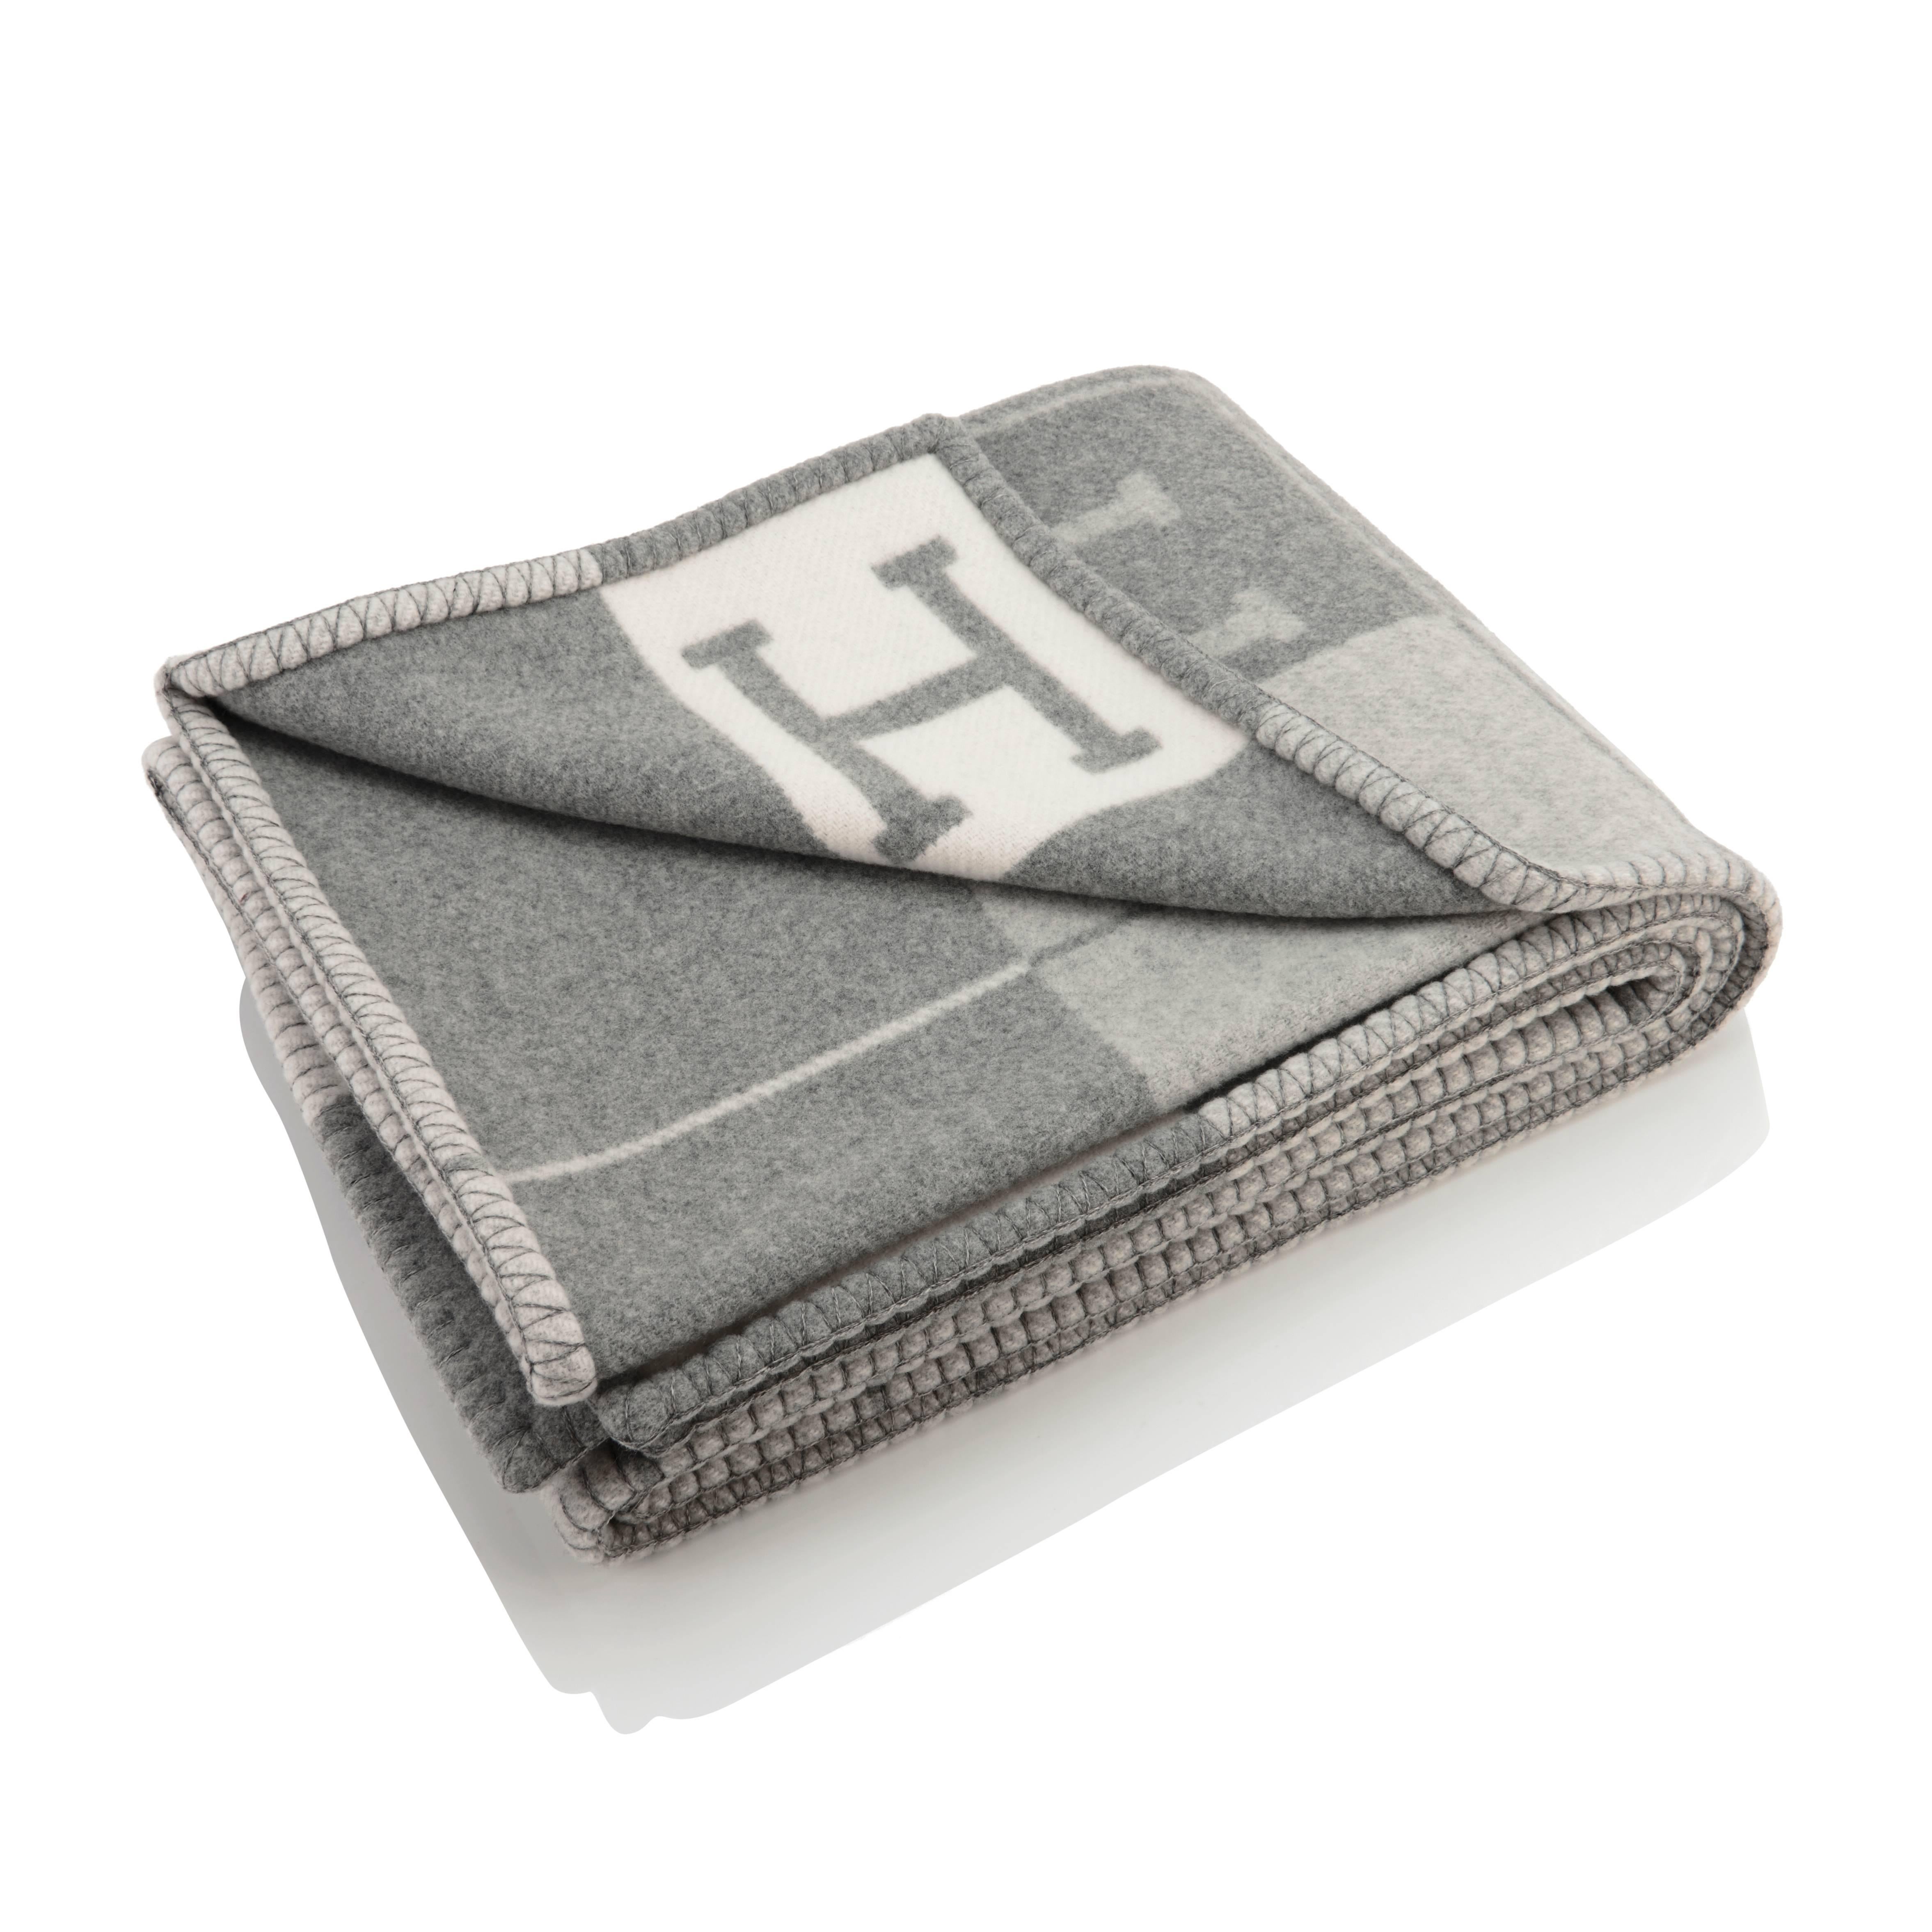 Hermes Avalon Merino Wool Cashmere Throw Blanket Ecru Light Gray 
Below $1660 retail including sales tax where we are.
Brand New.  Store Fresh.  Pristine Condition (no box).
Beautiful giant Hermes throw blanket.
Luxurious and soft composition:  90%